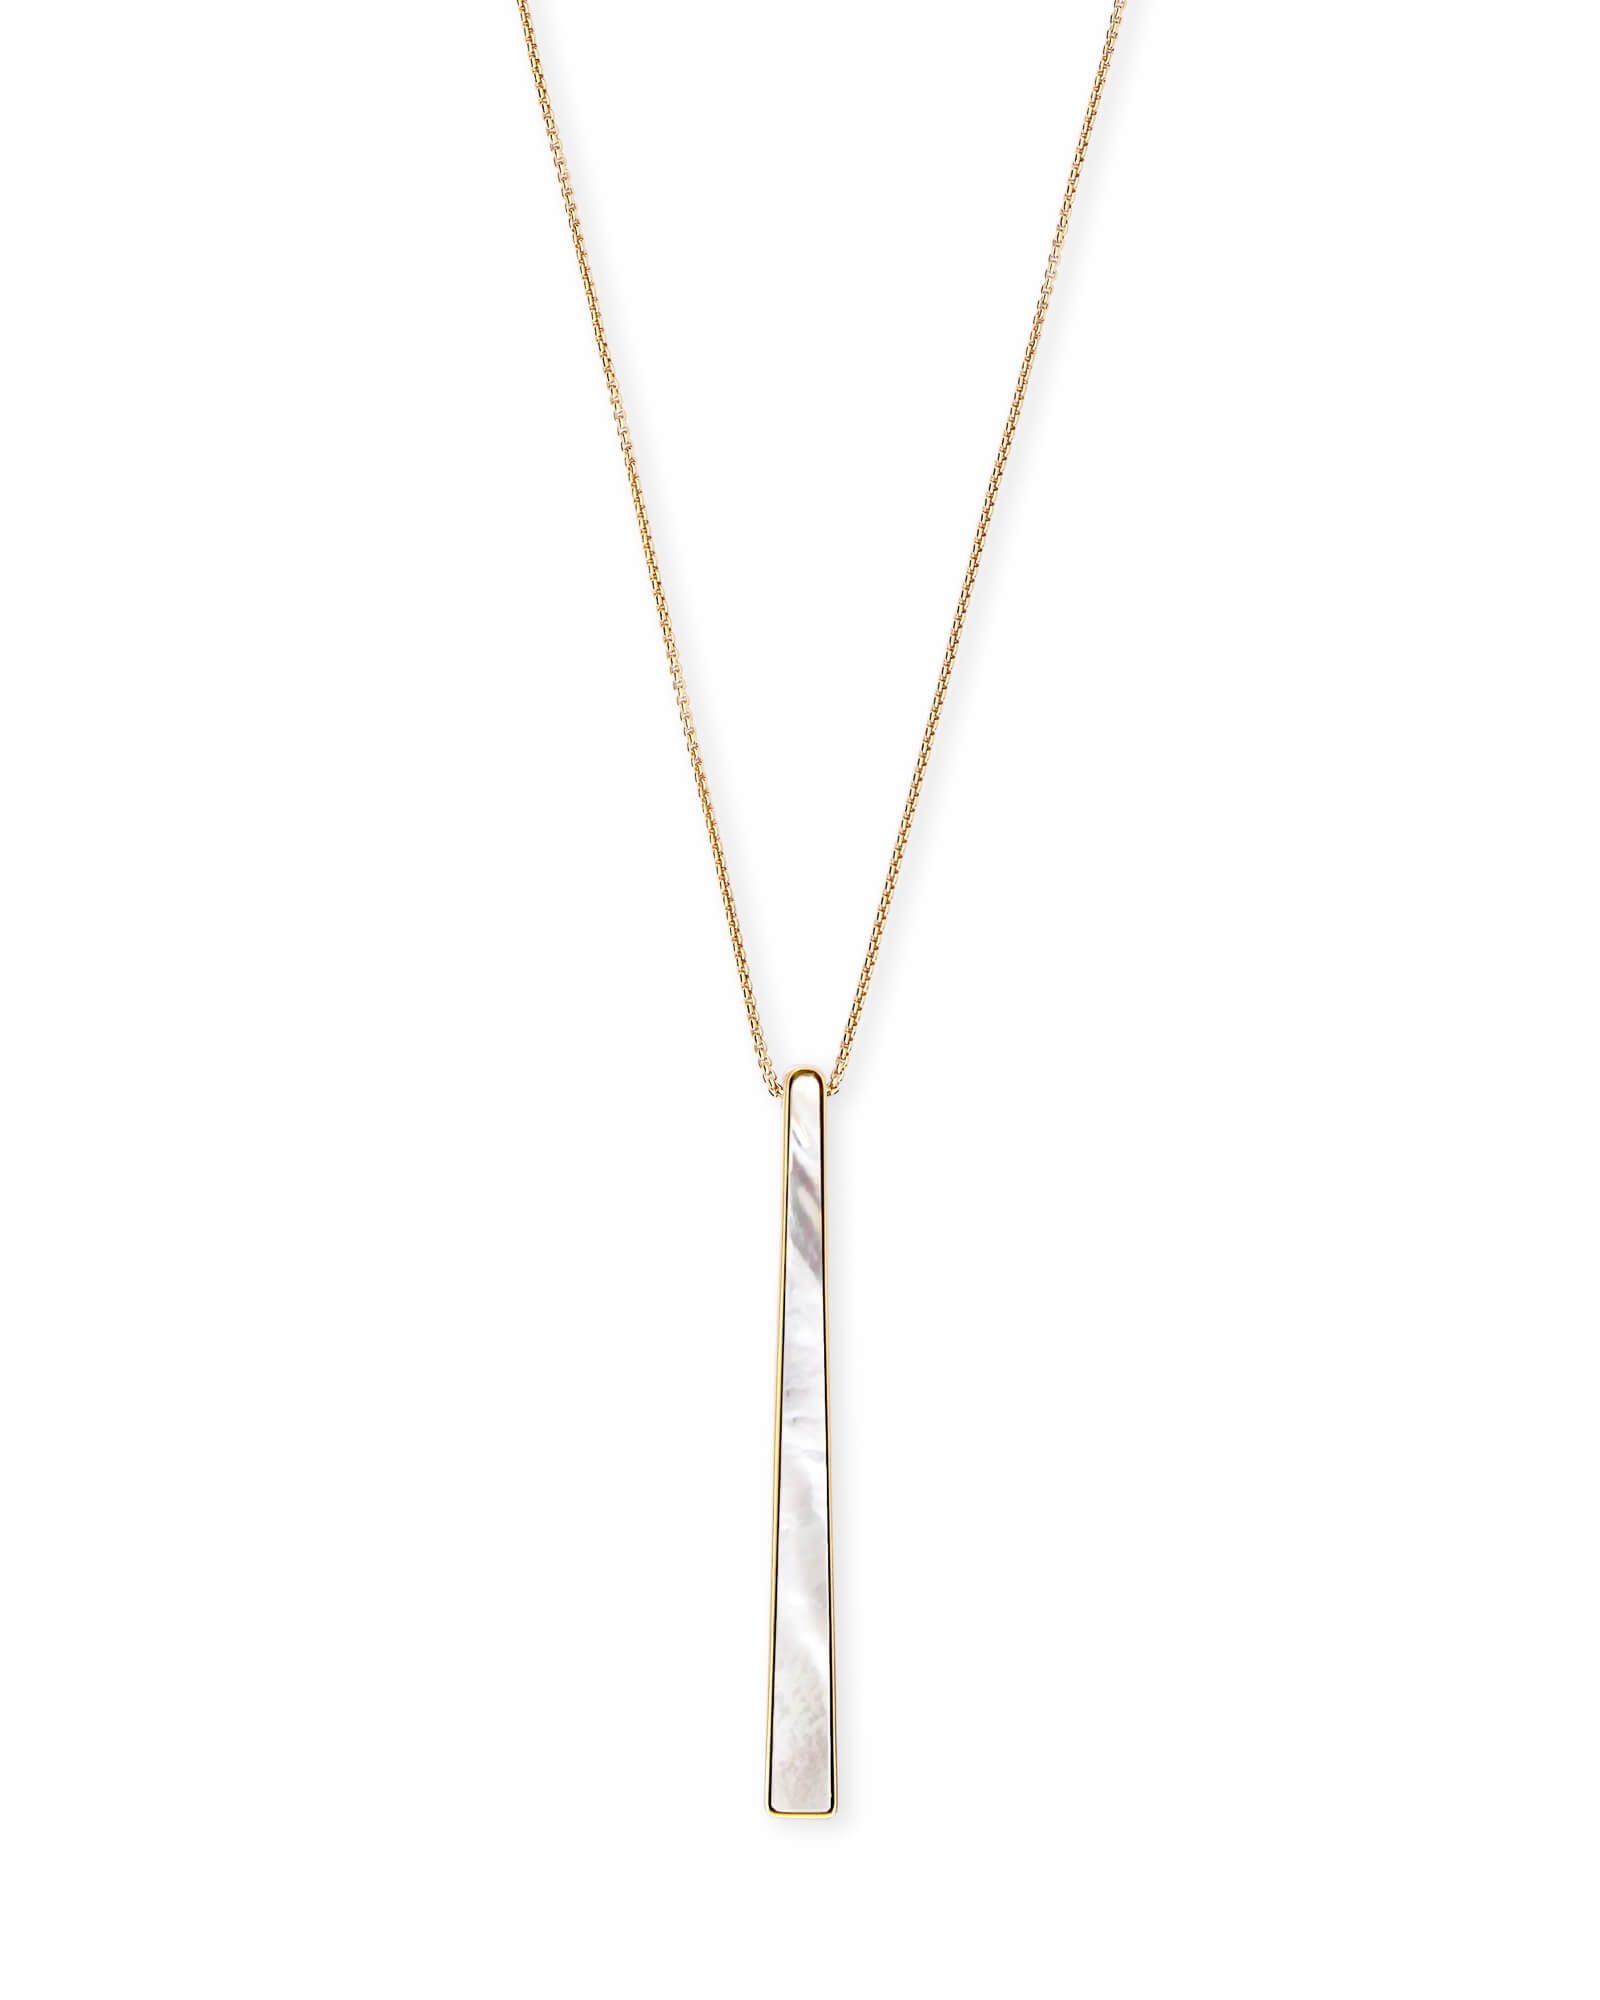 Baleigh Gold Long Pendant Necklace in Ivory Pearl | Kendra Scott